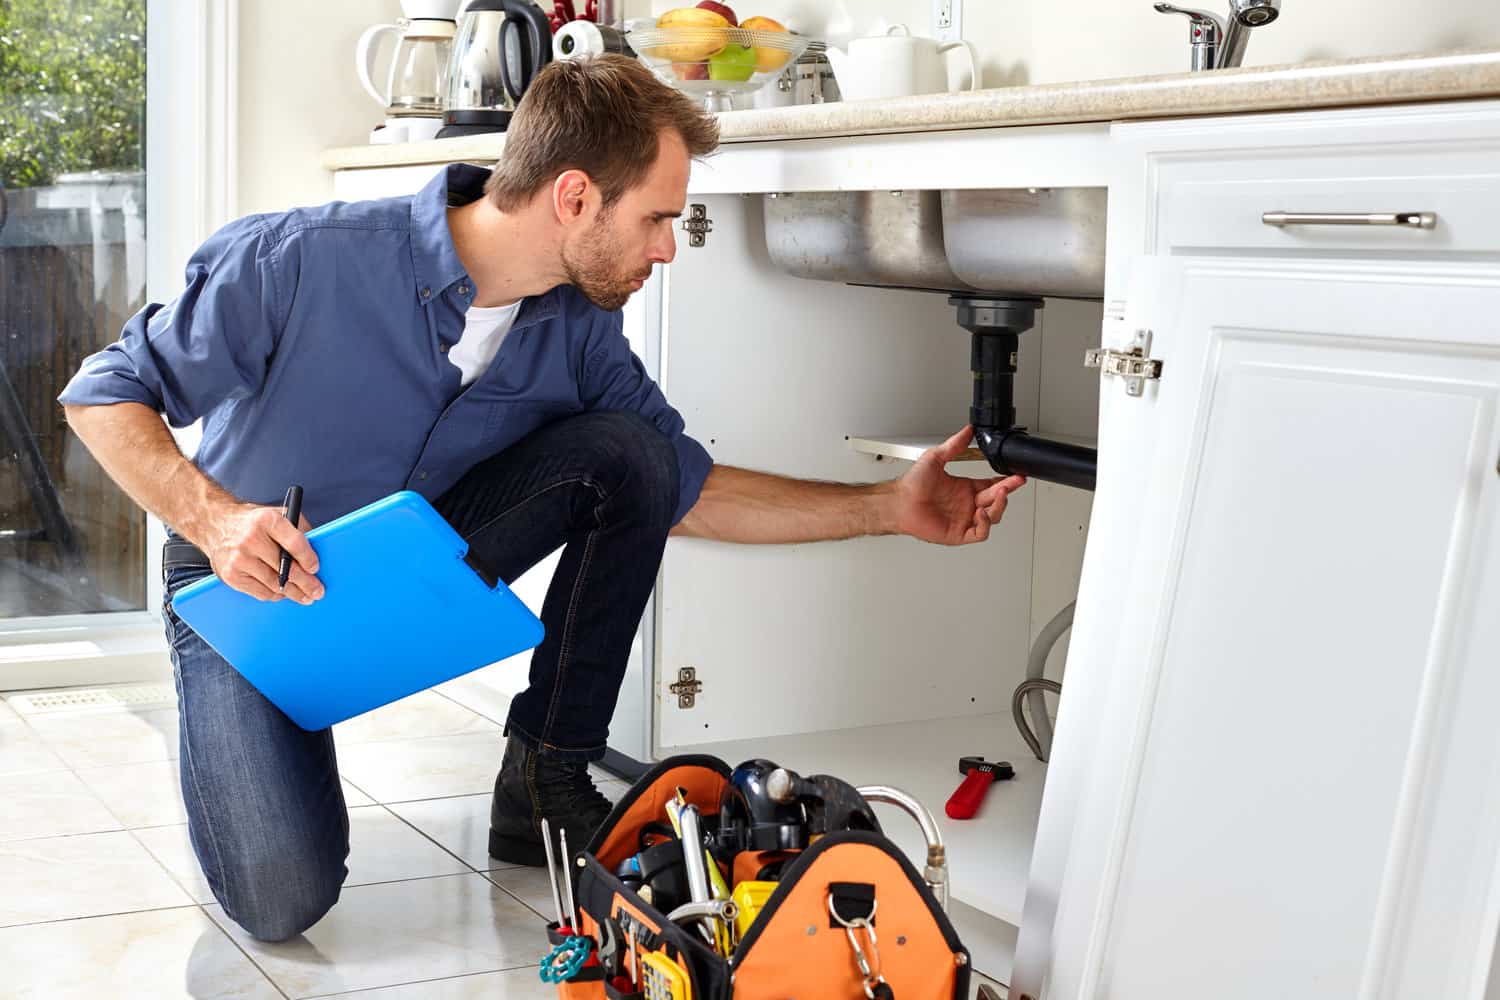 How To Find Professional Plumber To Clear Blocked Drains